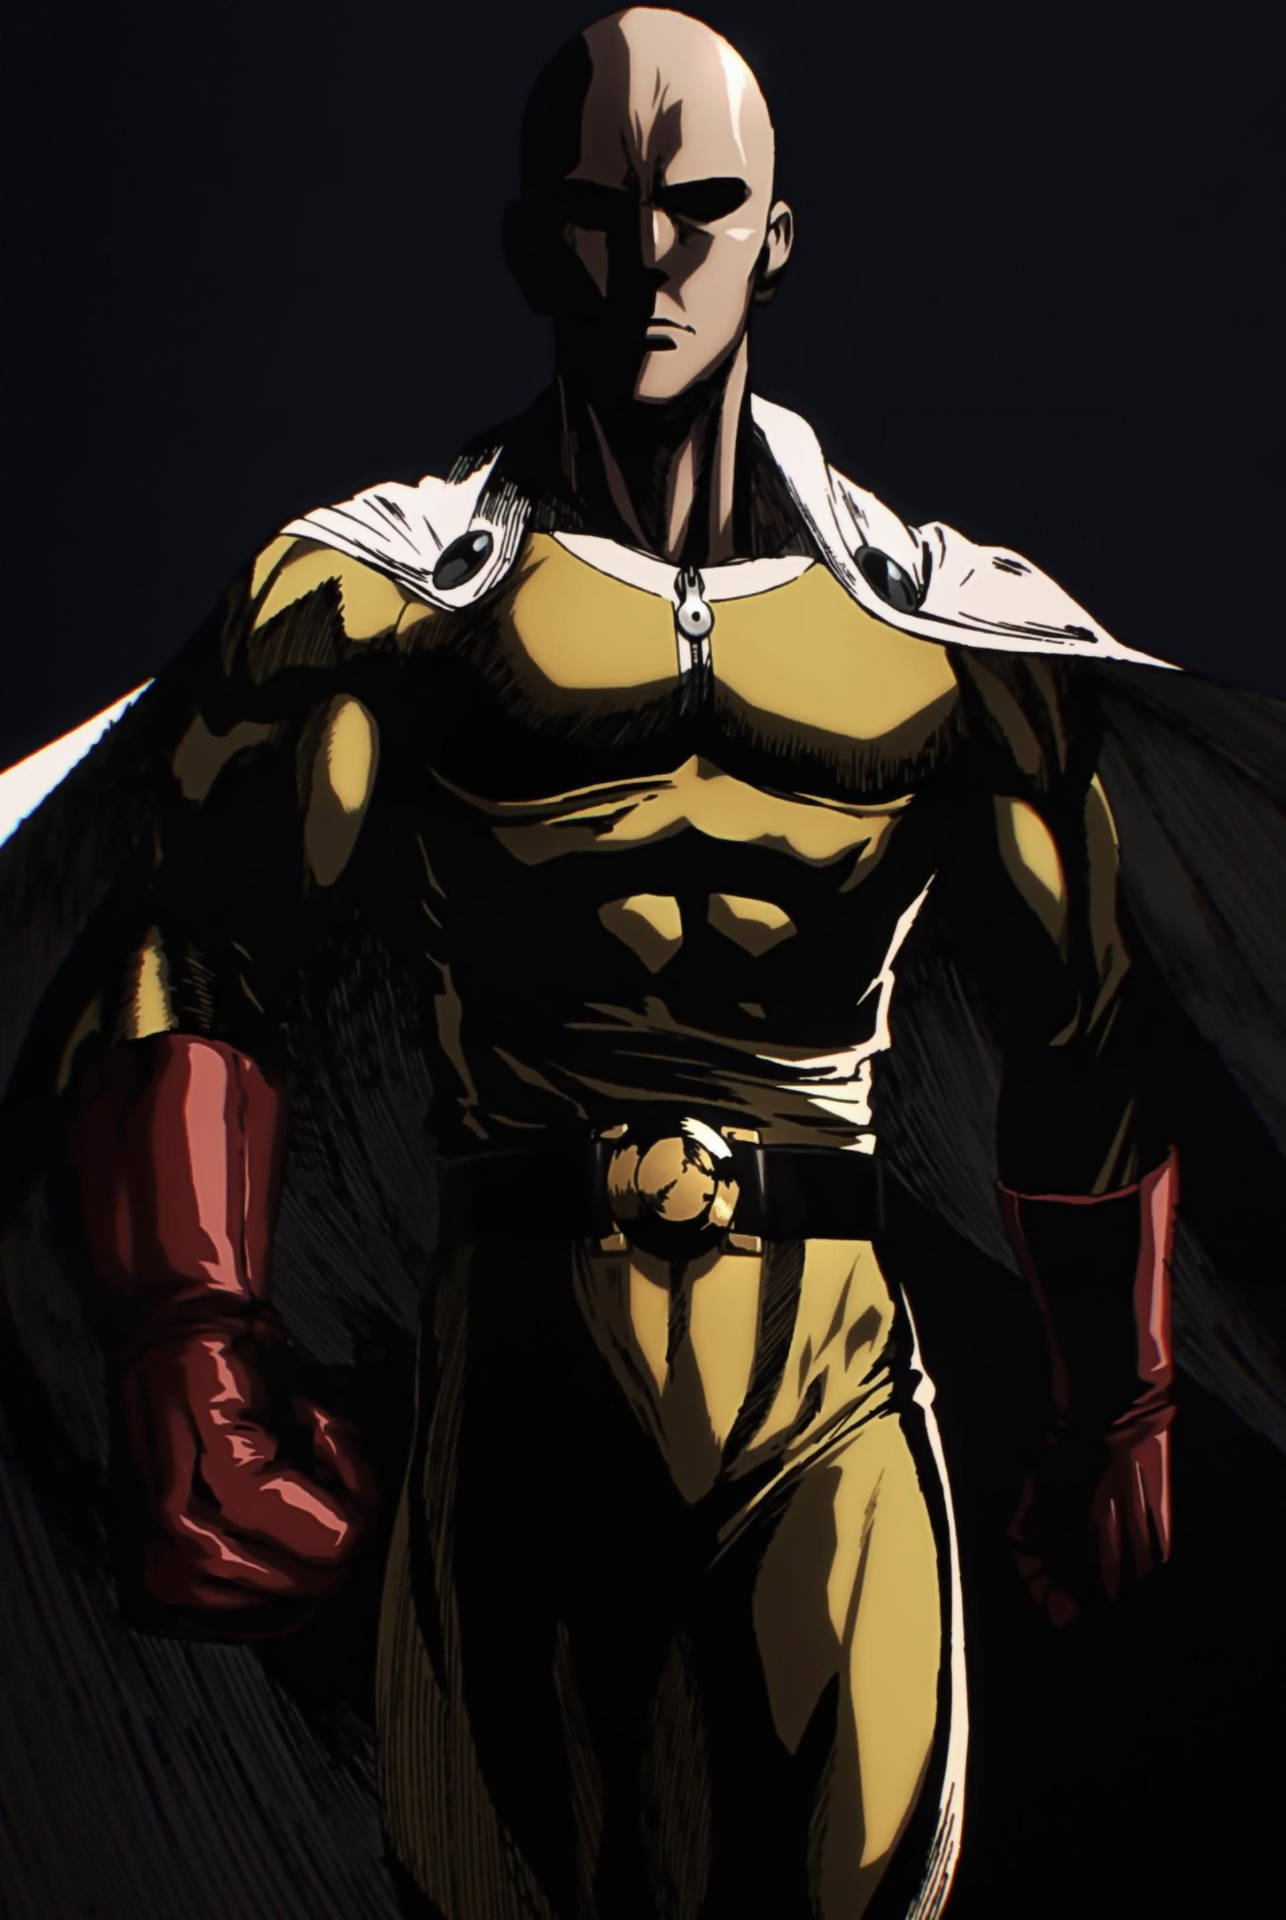 "The Strongest Hero - One Punch Man" Wallpaper